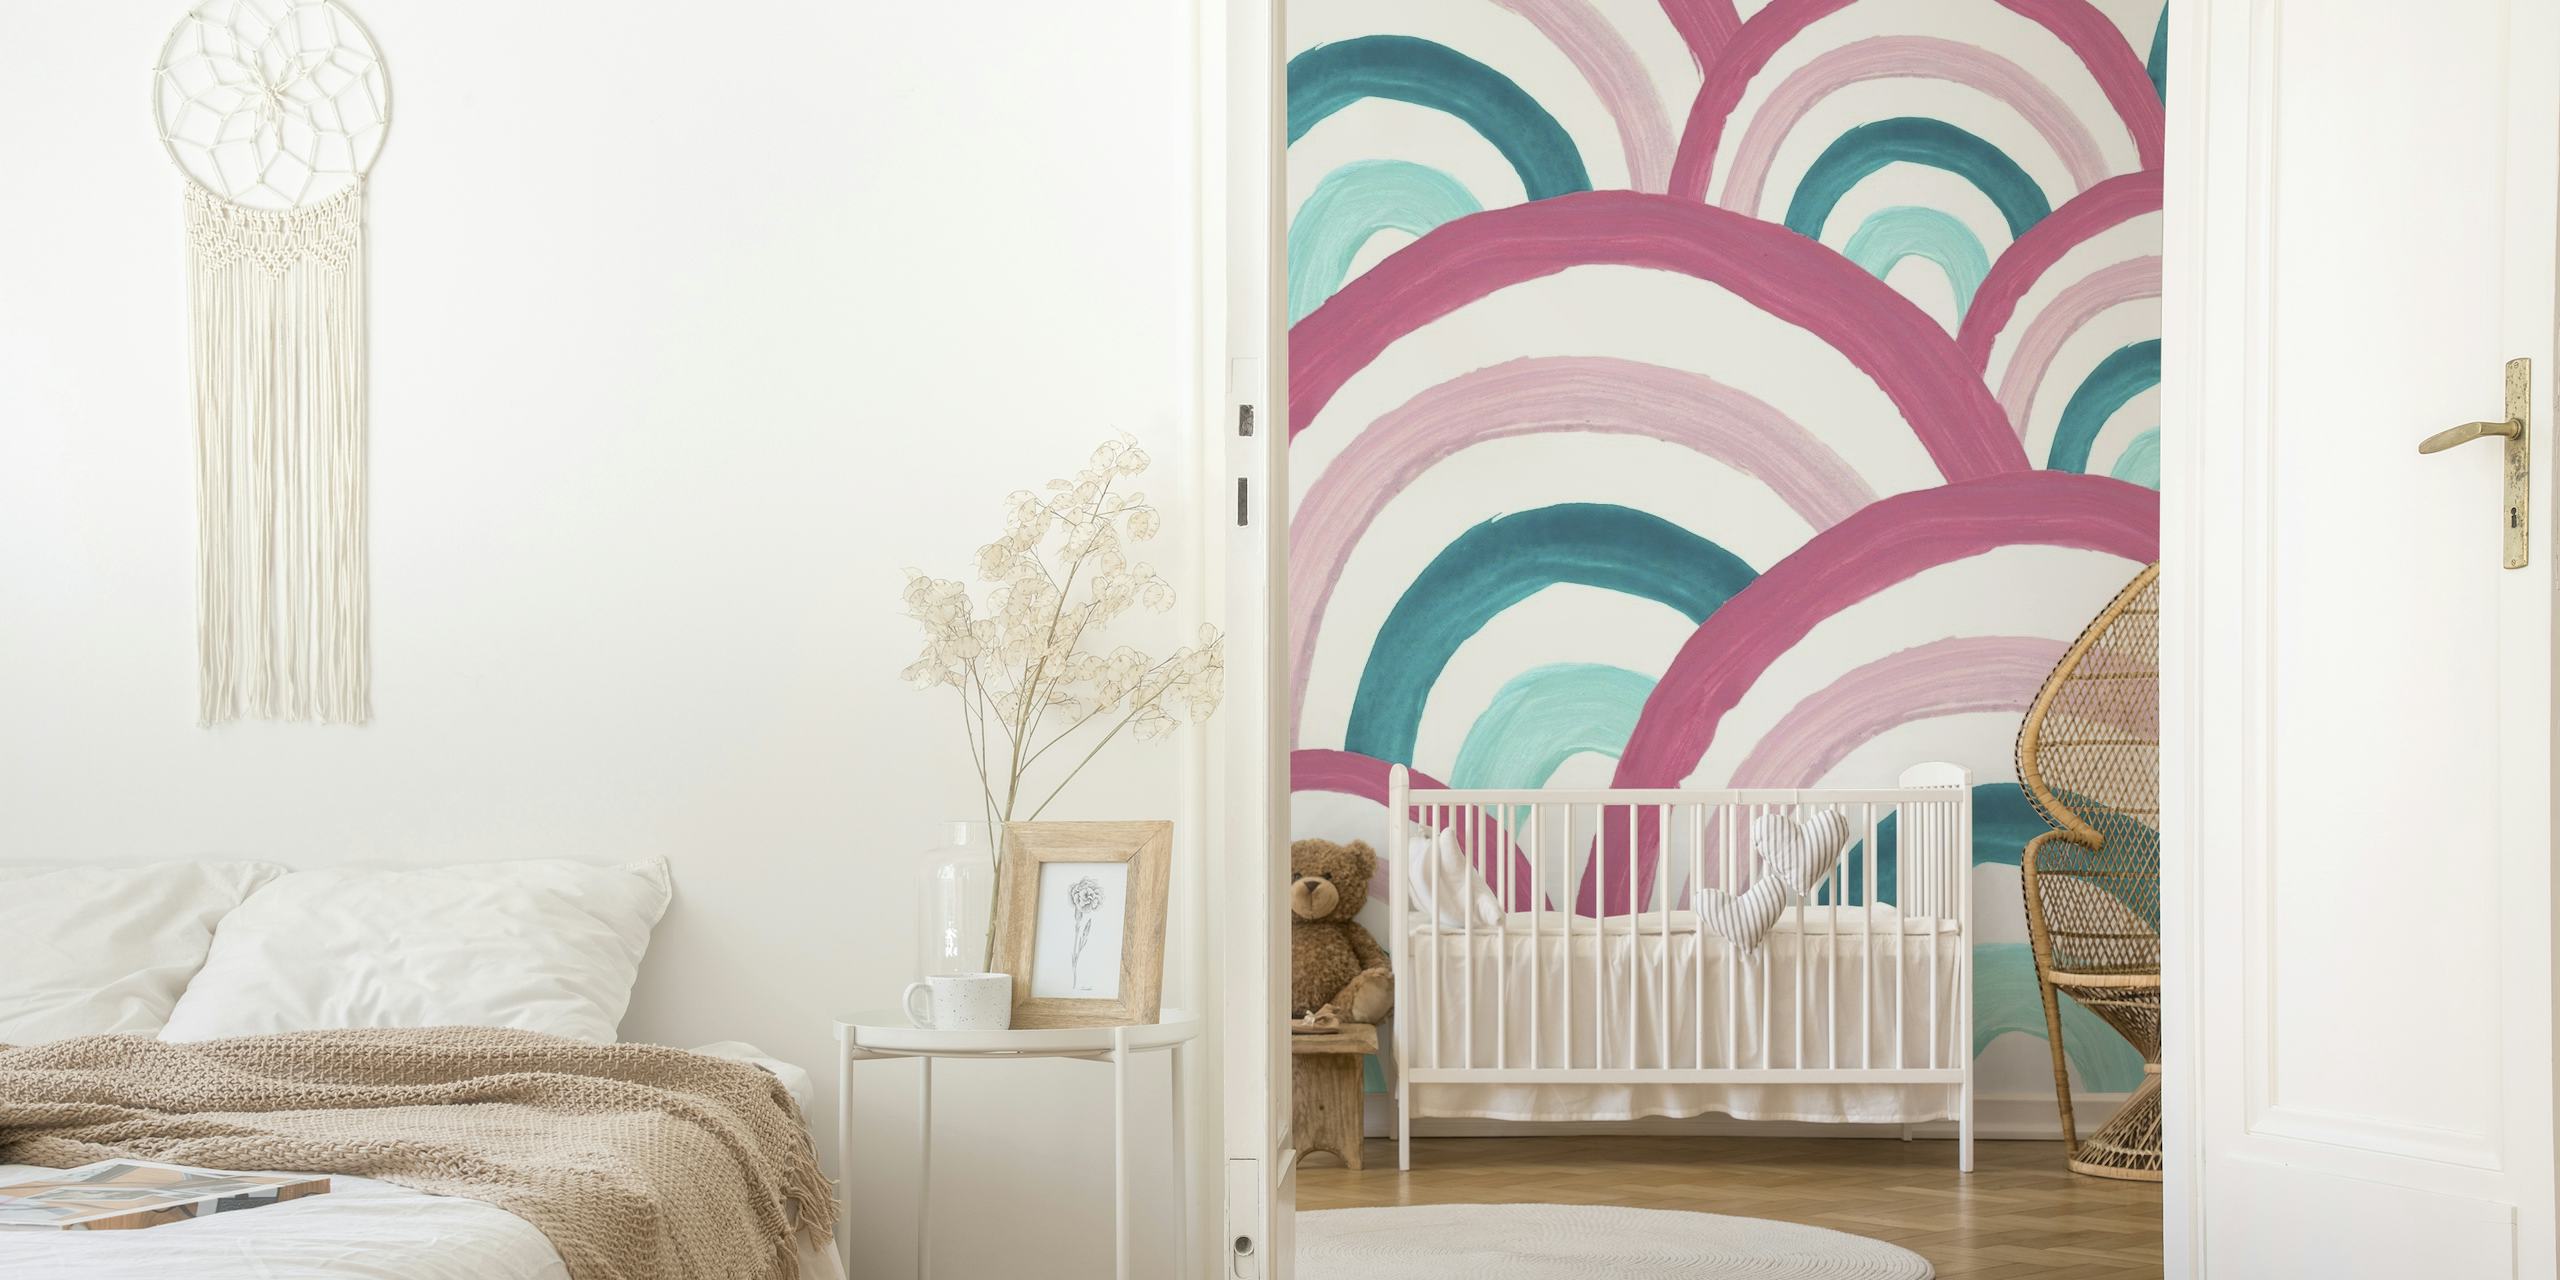 Pastel rainbow arches wall mural in shades of pink, mint, and cream